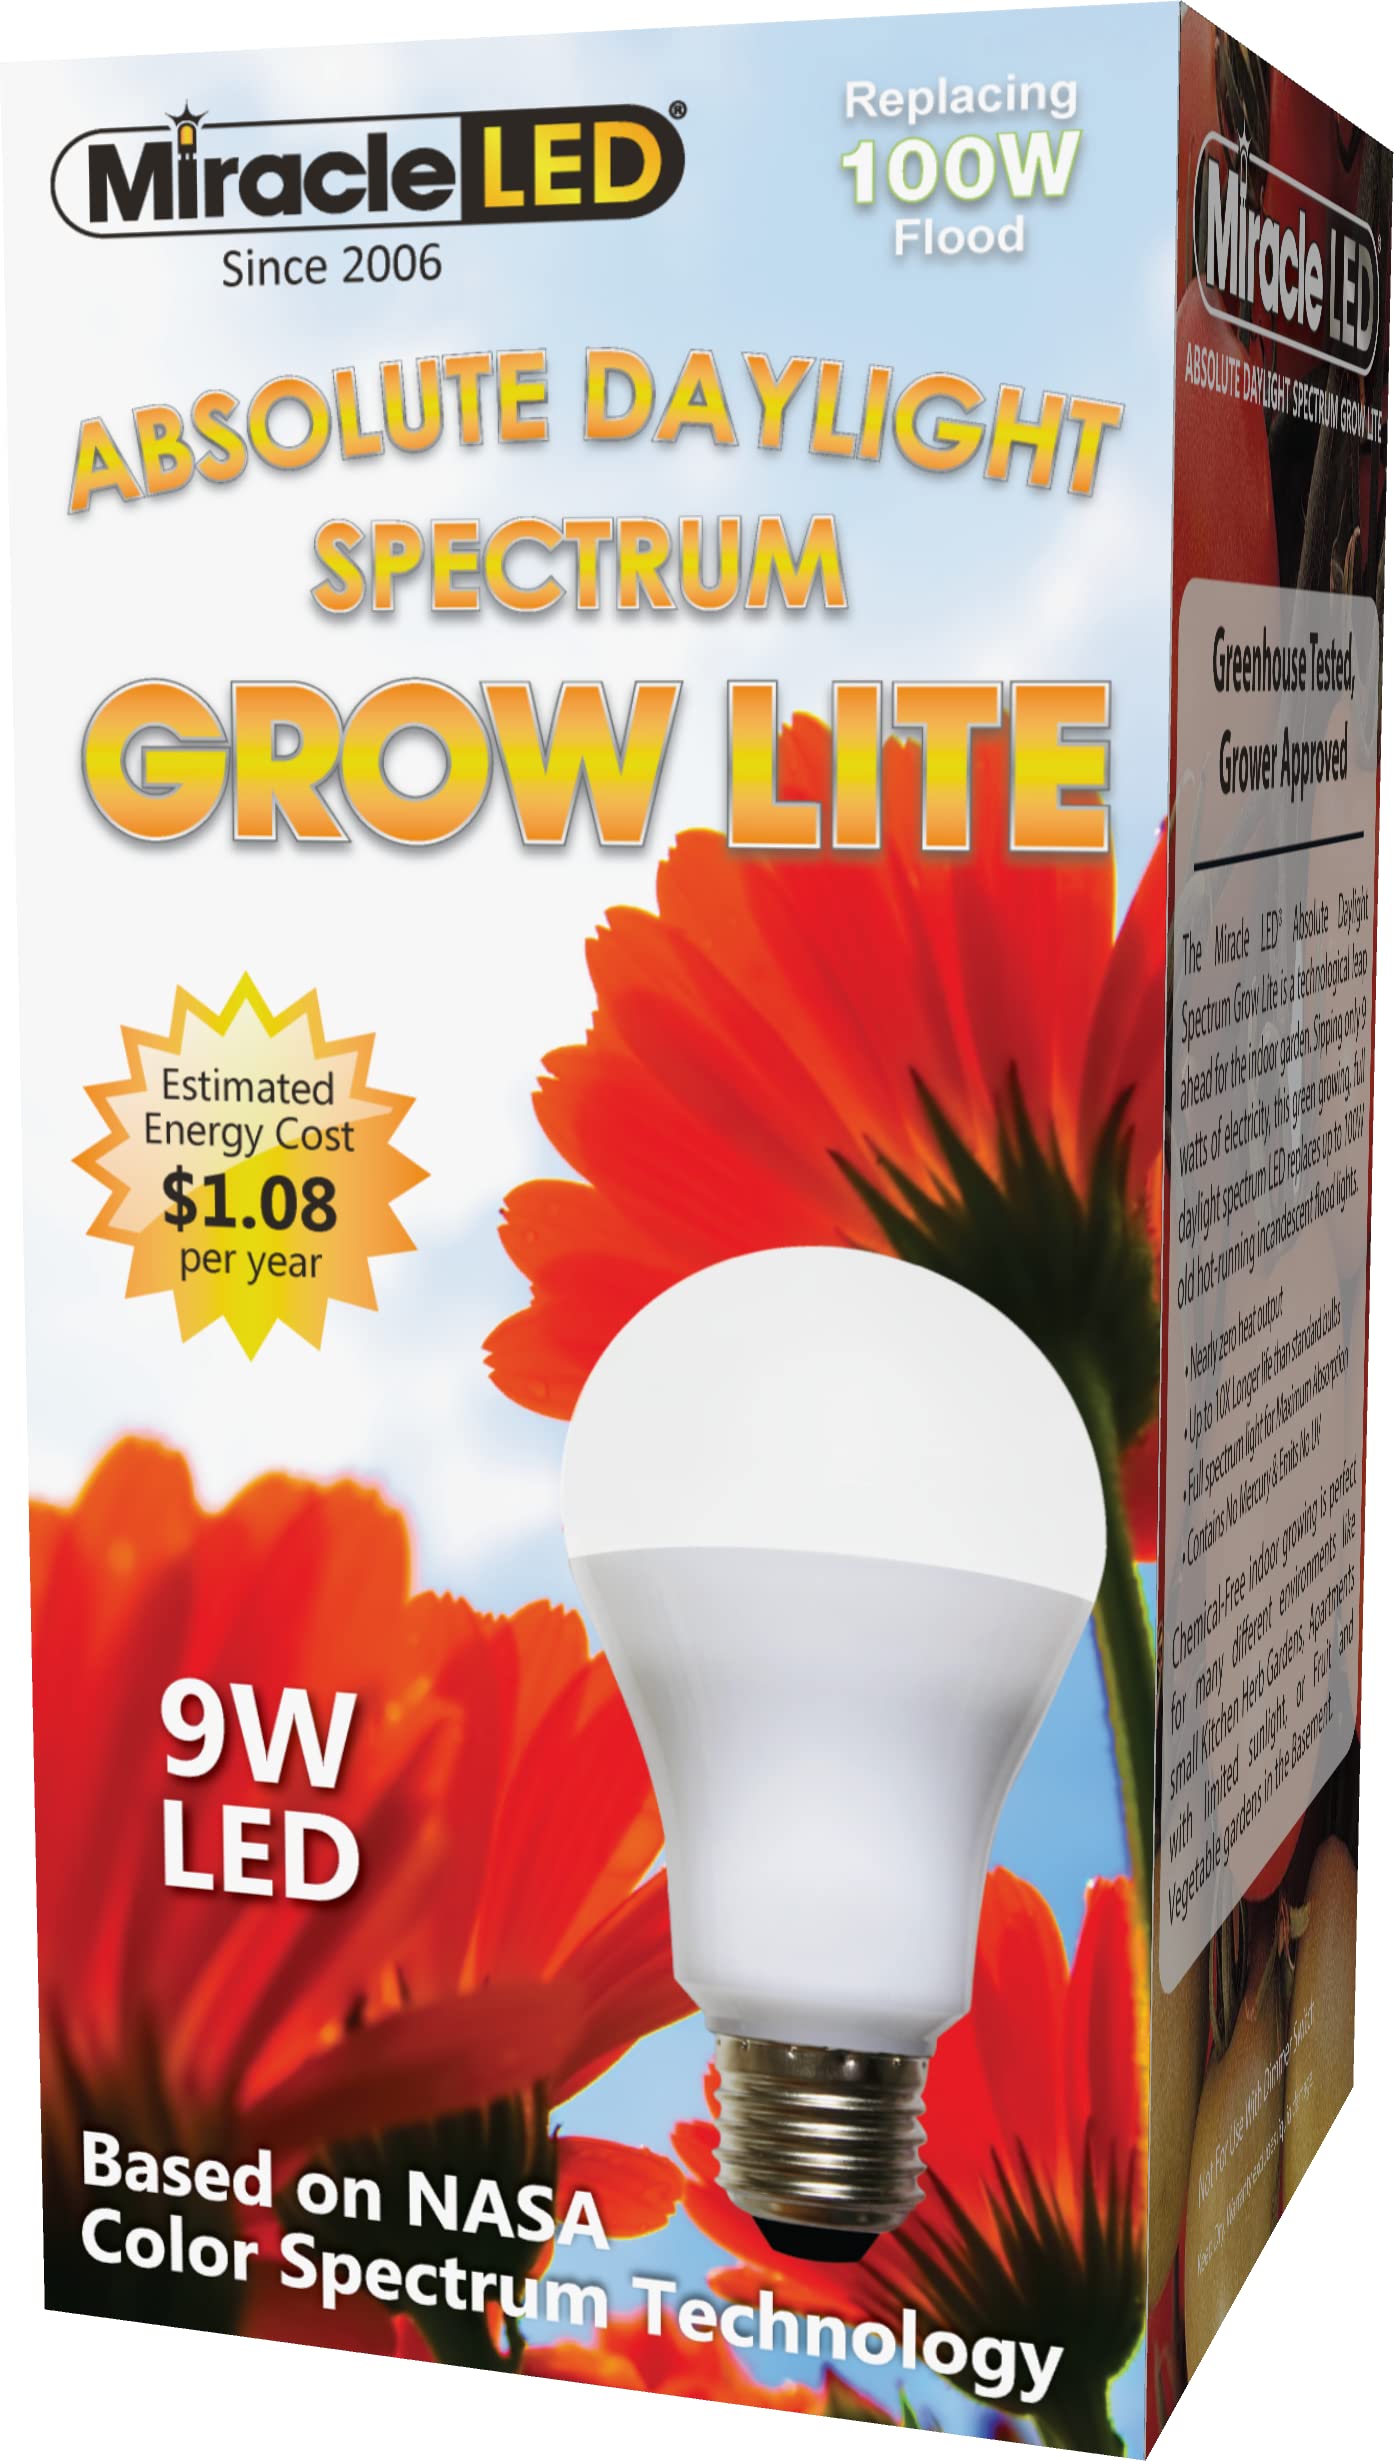 Miracle LED Absolute Daylight Spectrum Grow Lite - Replaces up to 100W - Full Spectrum Hydroponic LED Plant Growing Light Bulb $4.48 + Free Shipping w/ Prime or on $35+